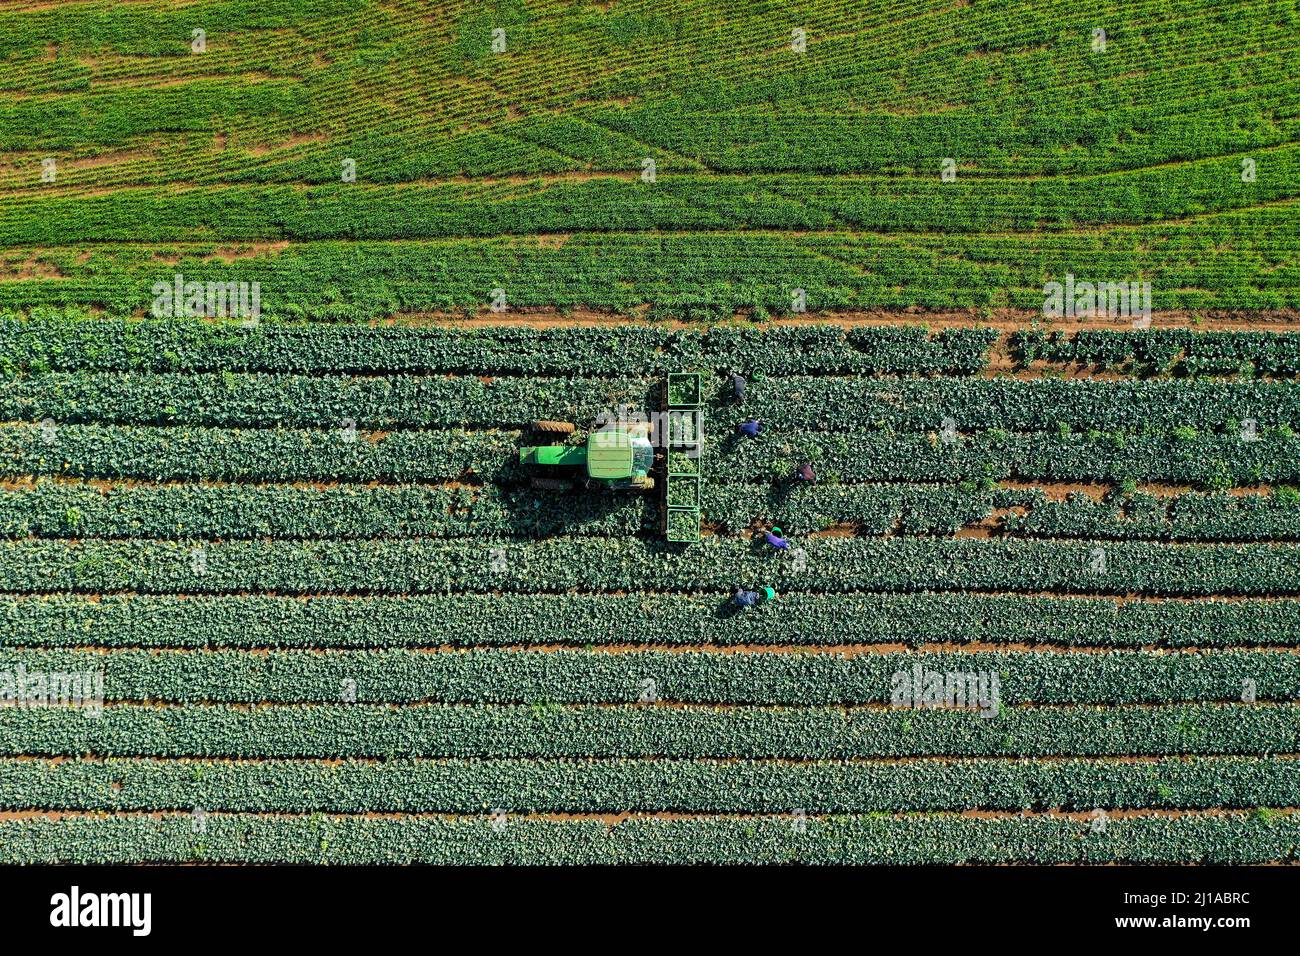 Farm workers picking Broccoli placing them in pallets, aerial view. Stock Photo